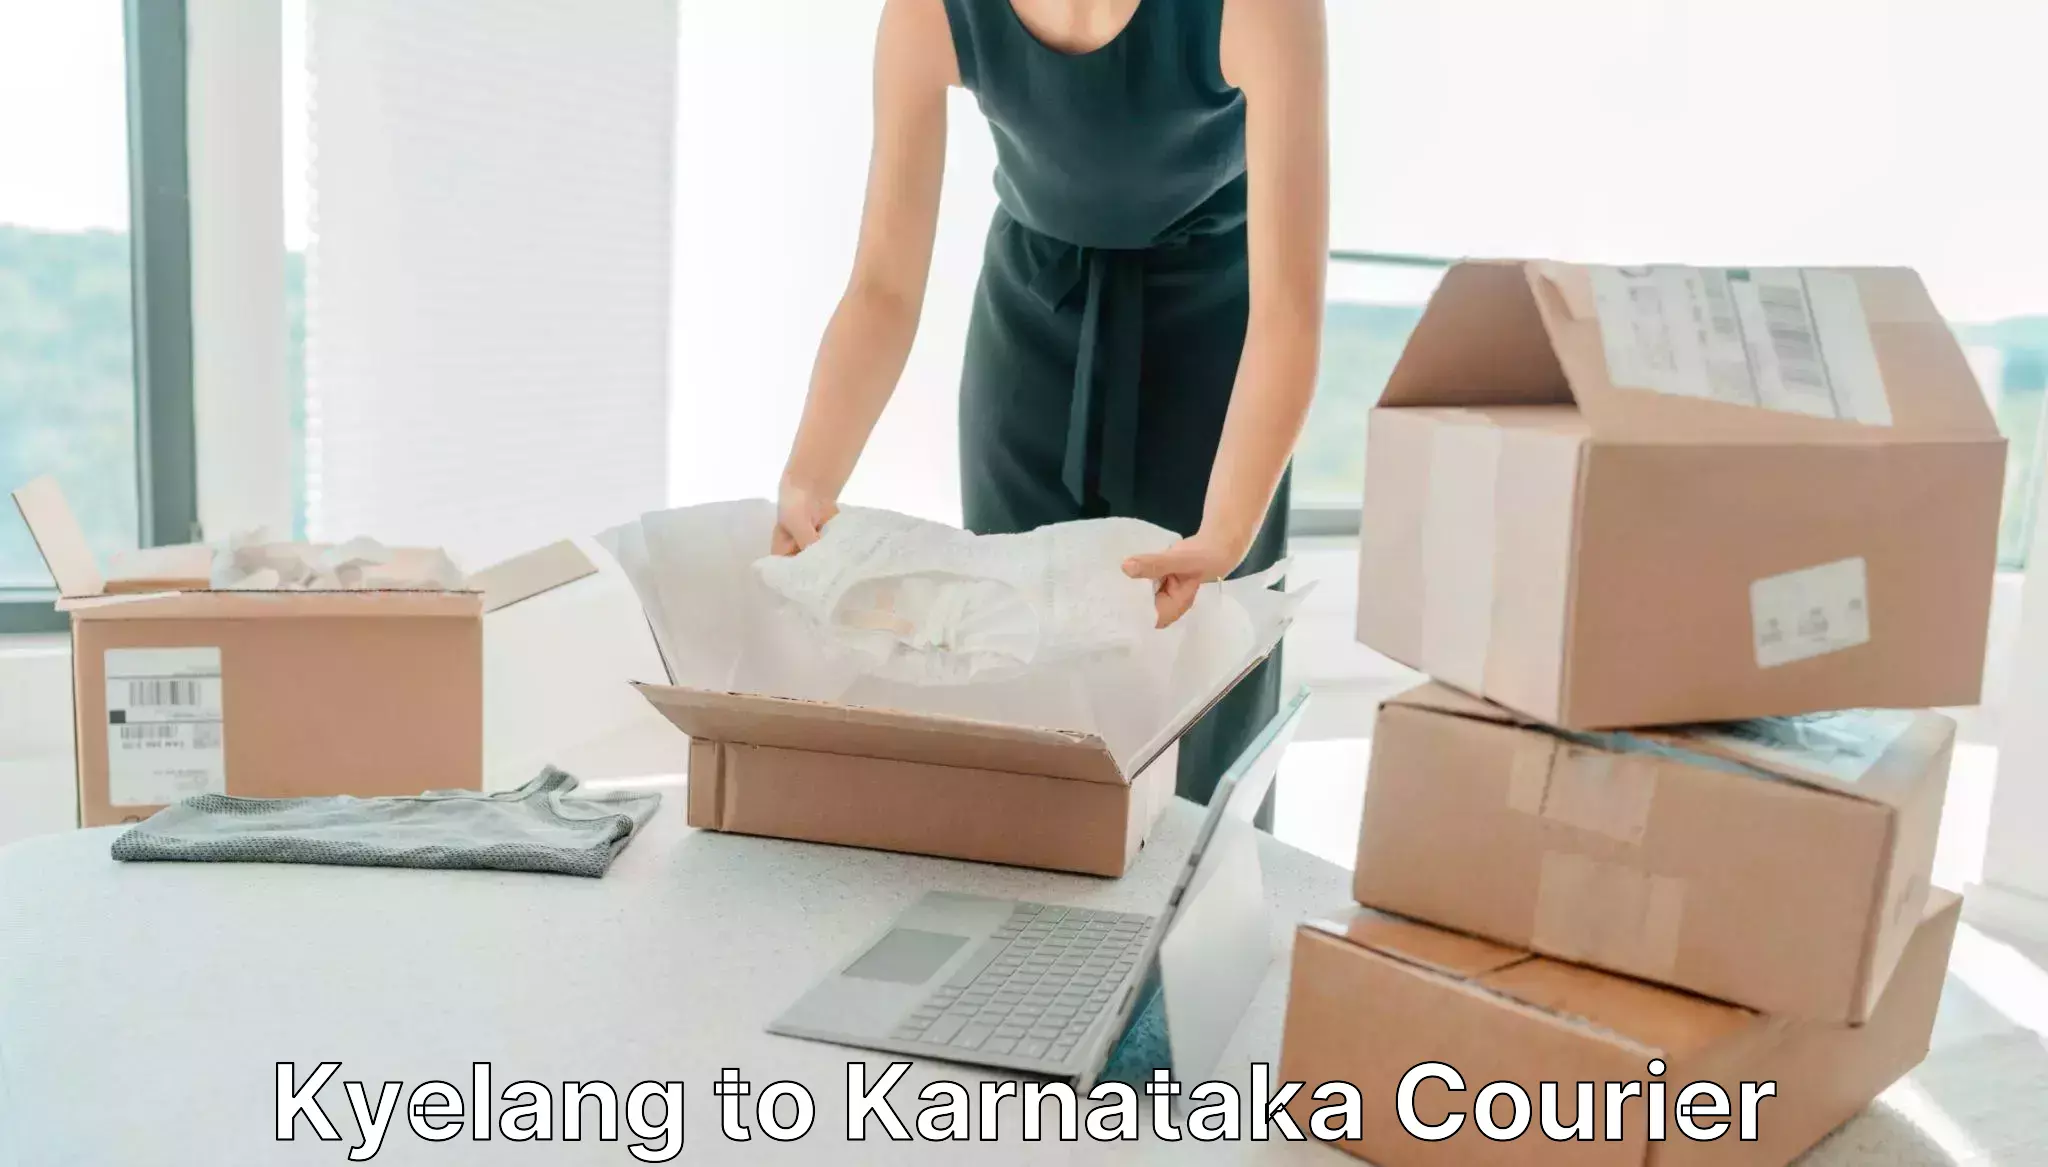 Nationwide courier service Kyelang to Yellare